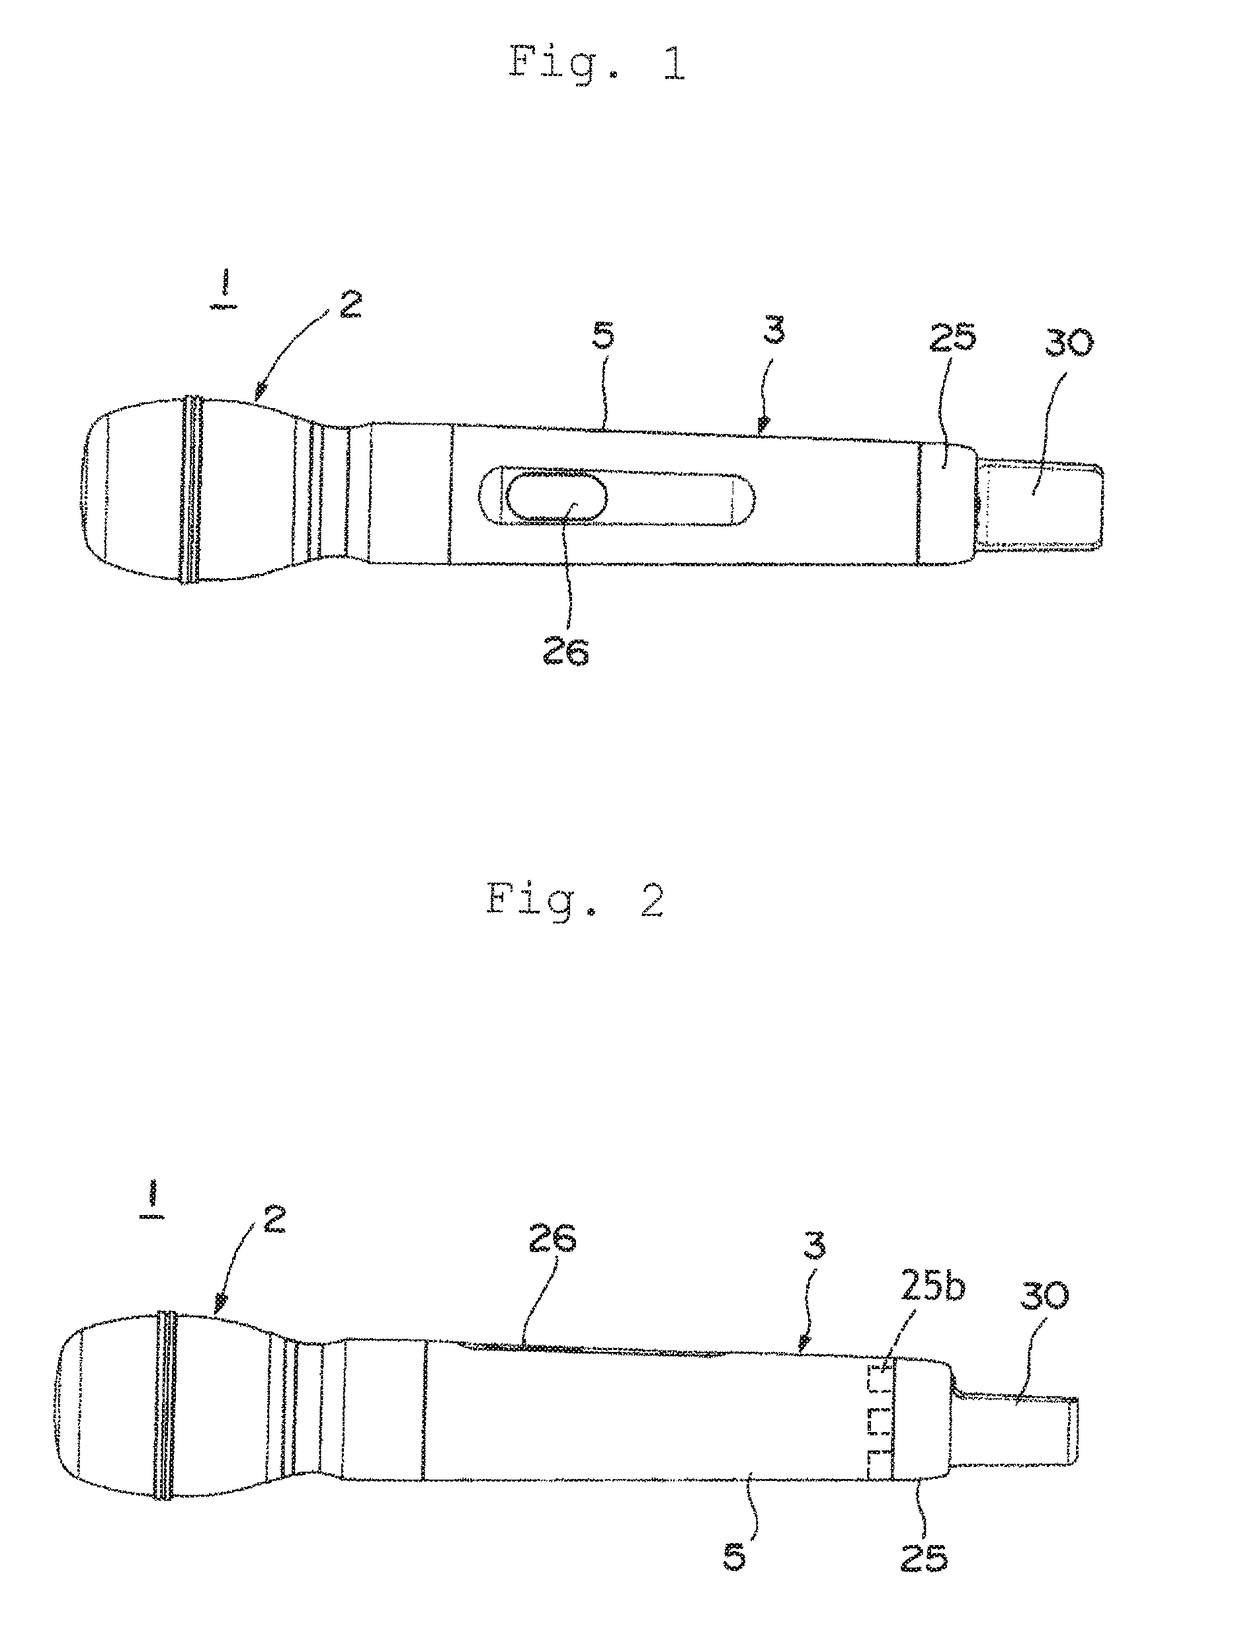 Wireless microphone with antenna therein